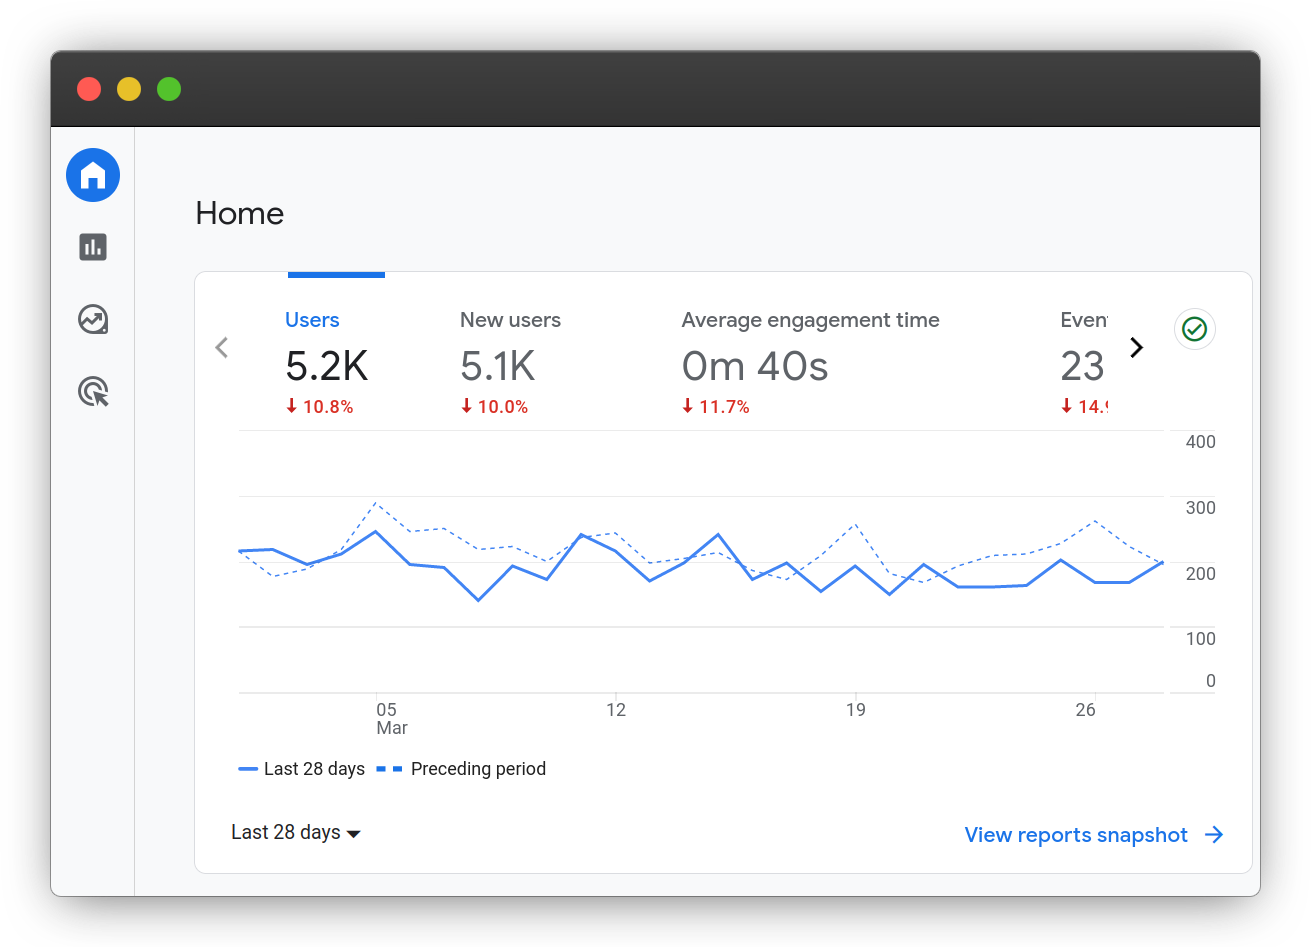 Differences between UA and Google Analytics 4